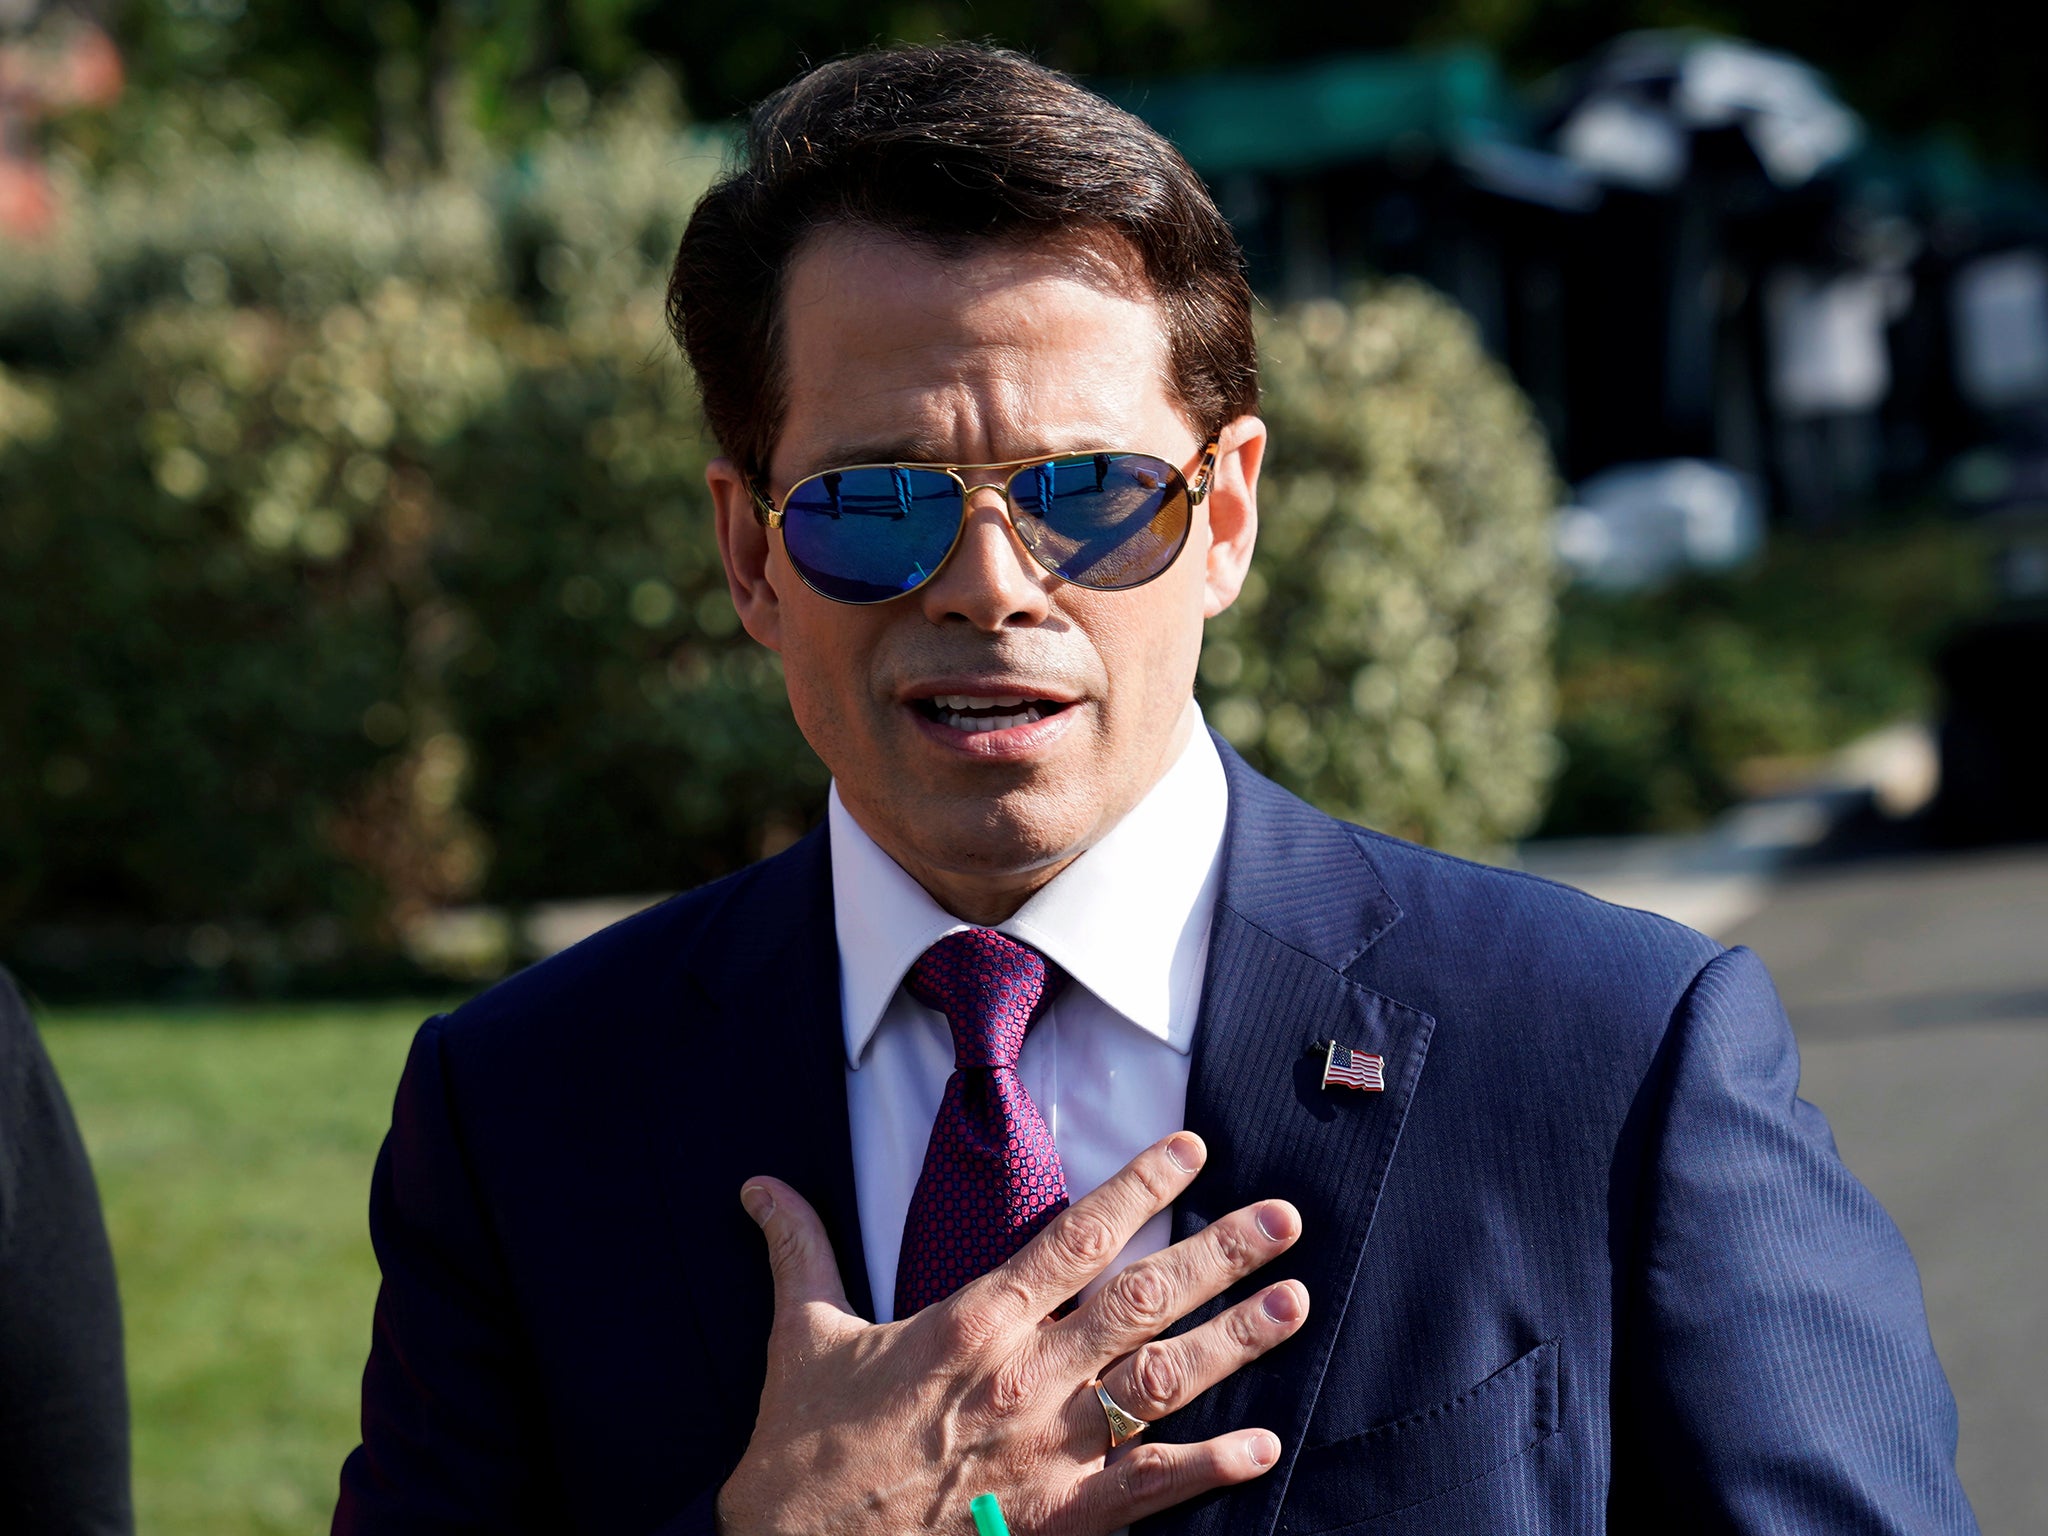 White House Communications Director Anthony Scaramucci